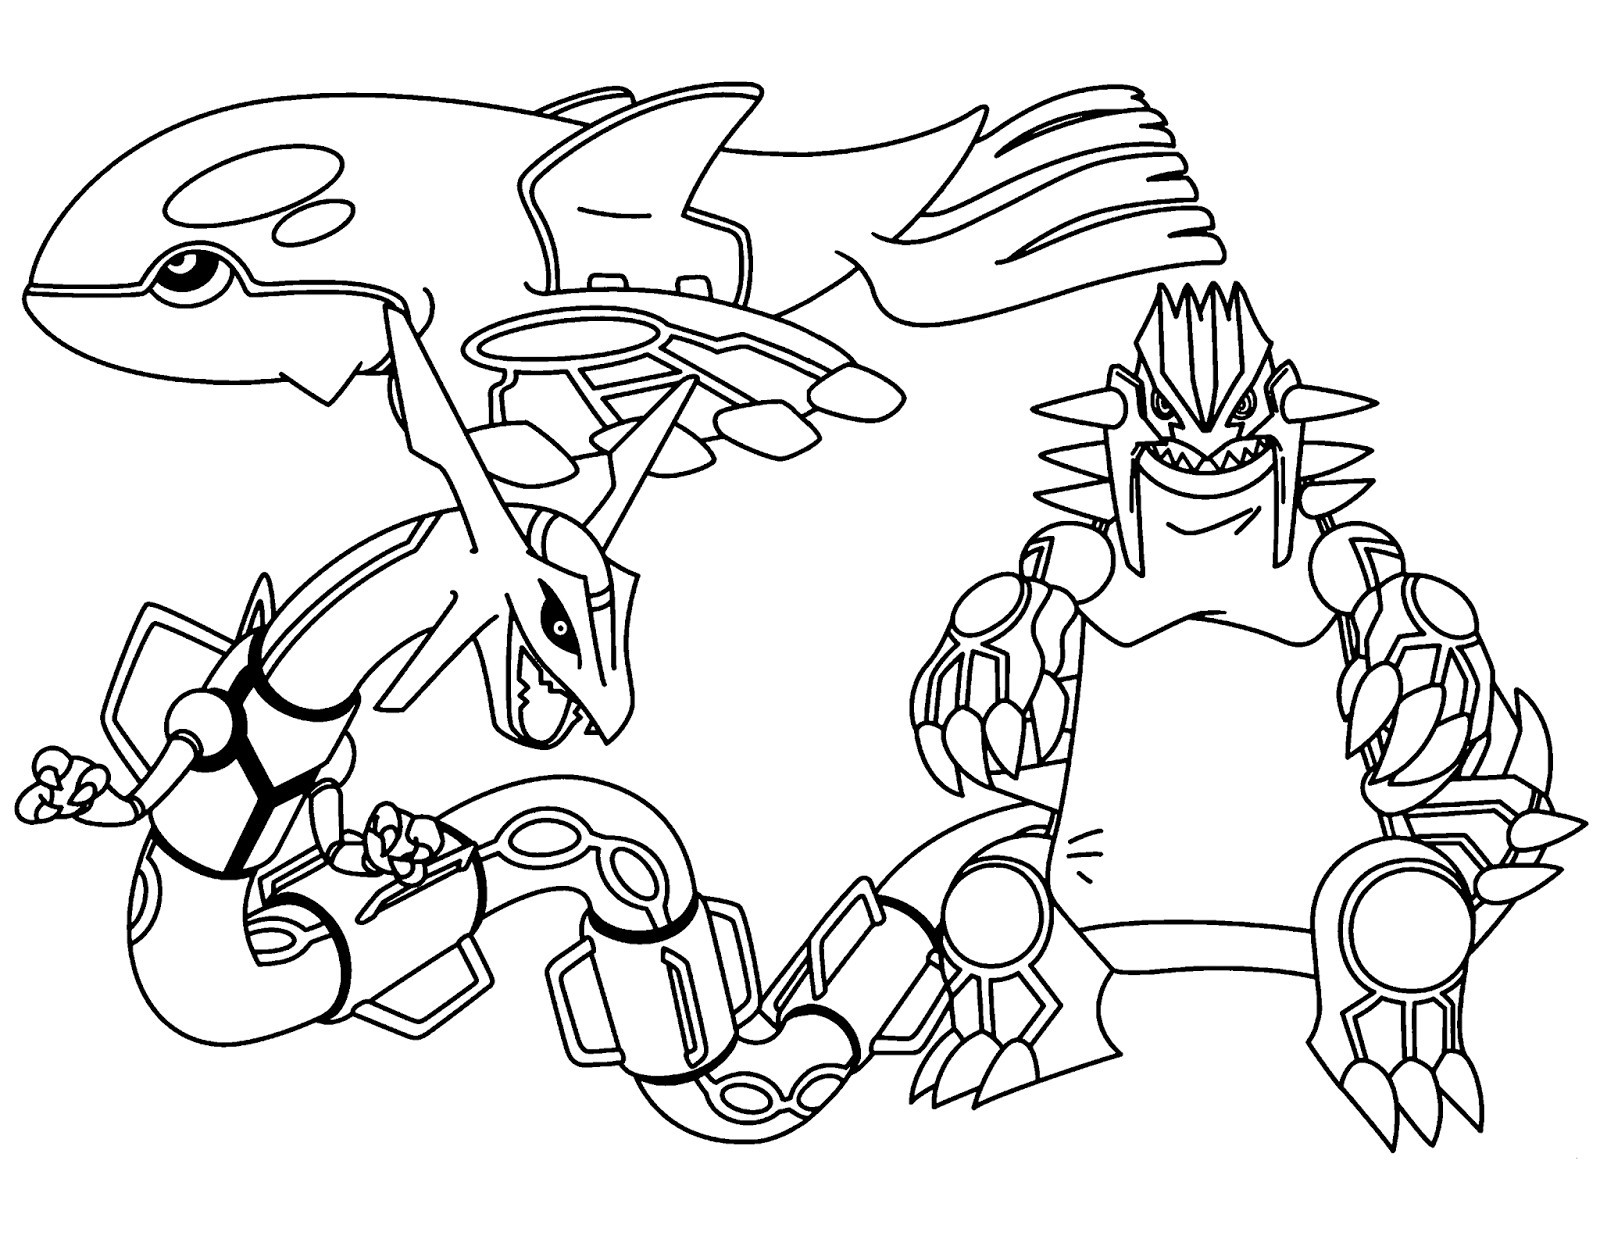 Legendary Pokemon Coloring Pages Rayquaza Coloringstar Bright 15